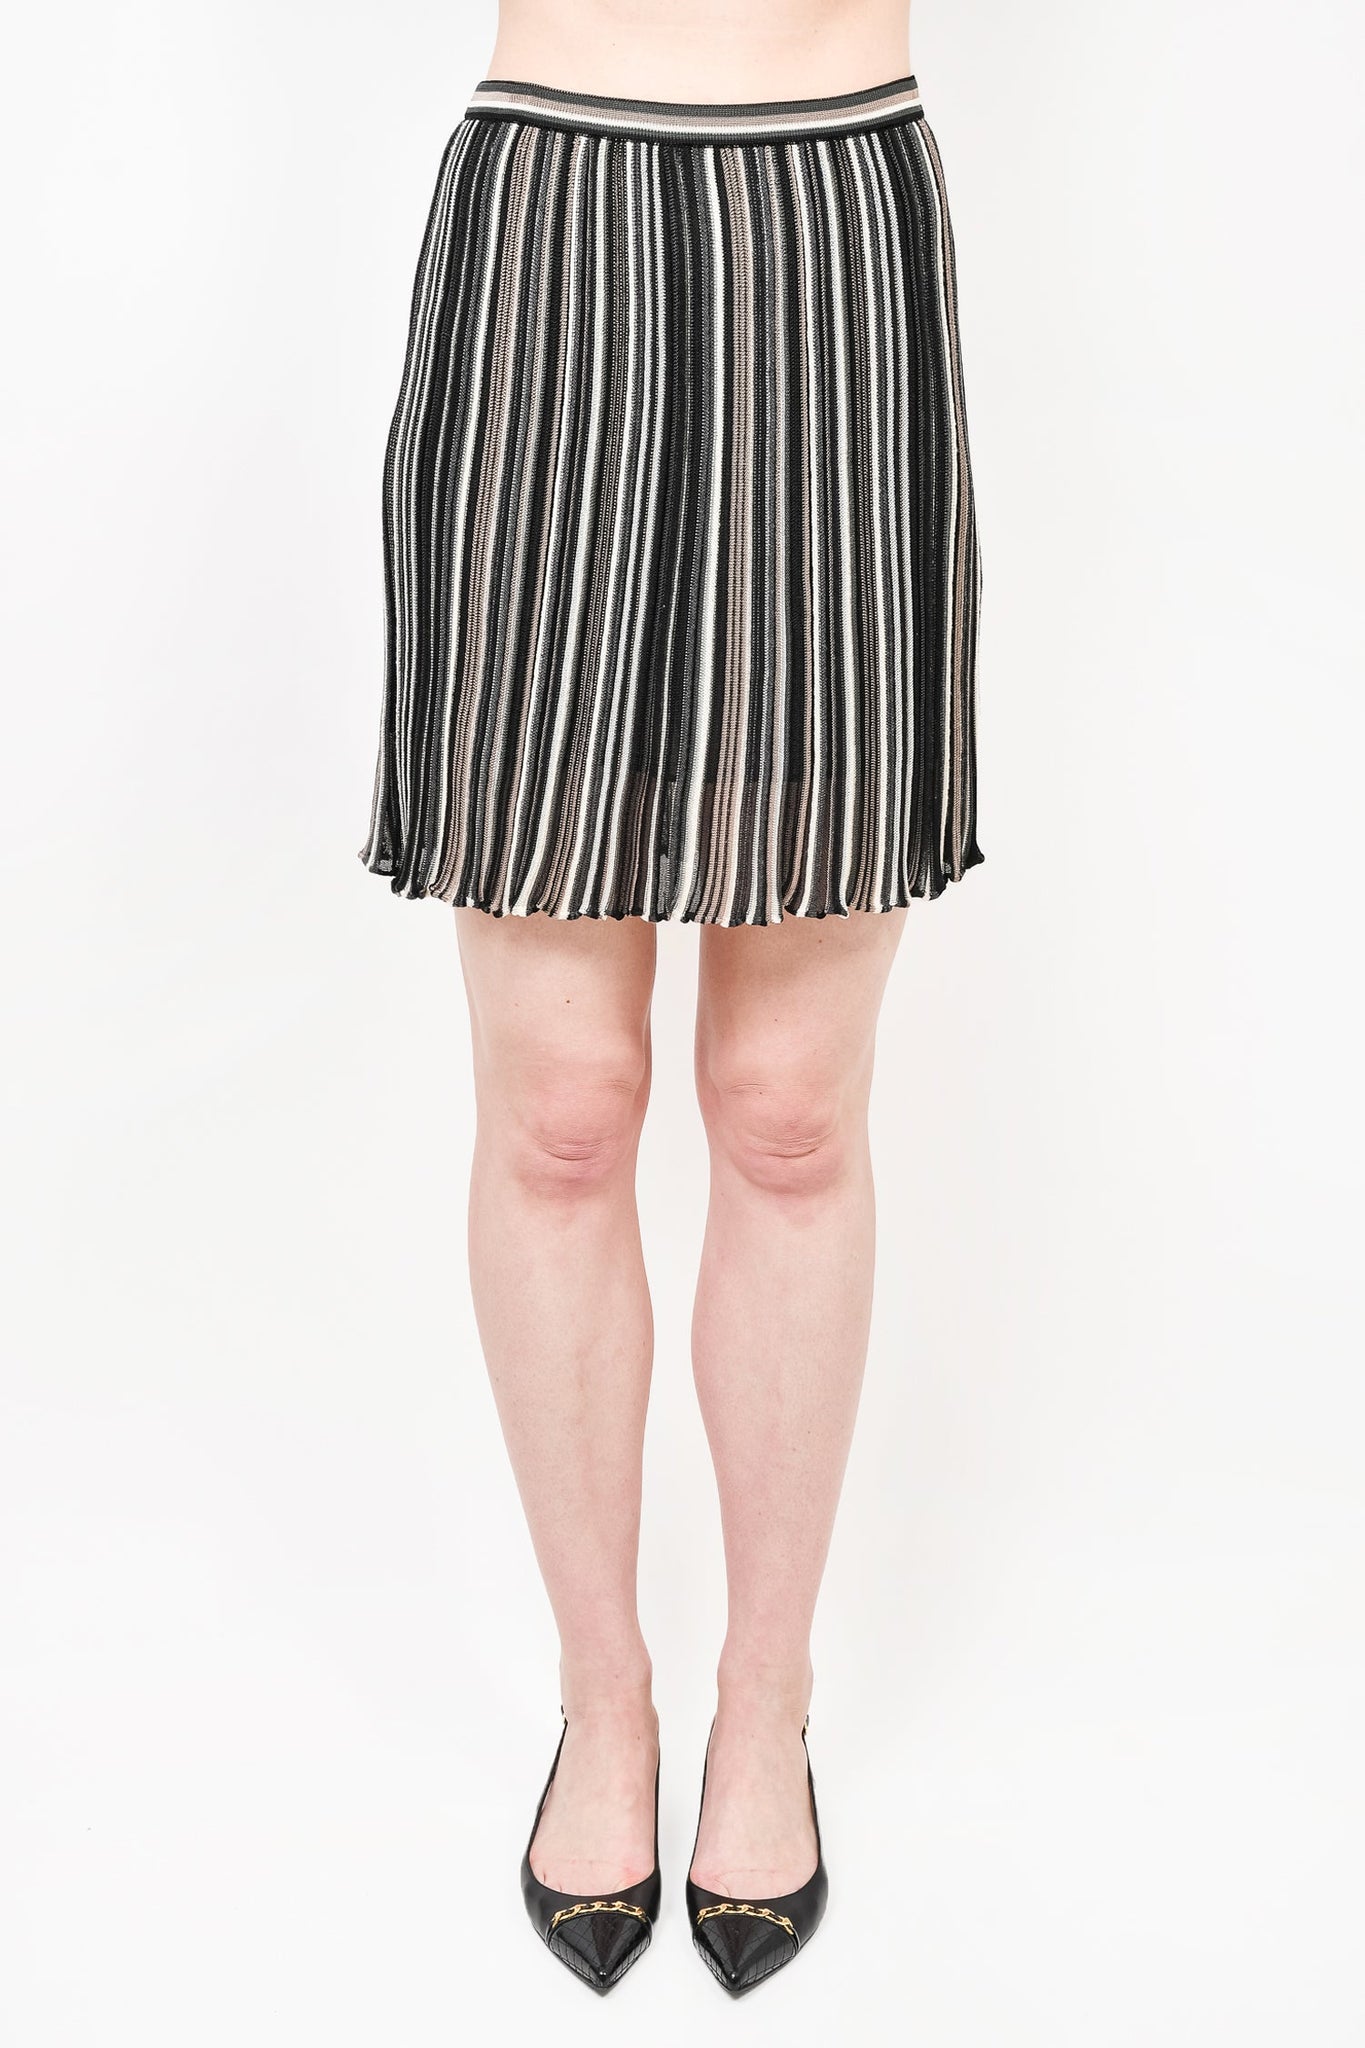 M Missoni Black/Taupe Striped Knit Mini Skirt with Tags Size 8